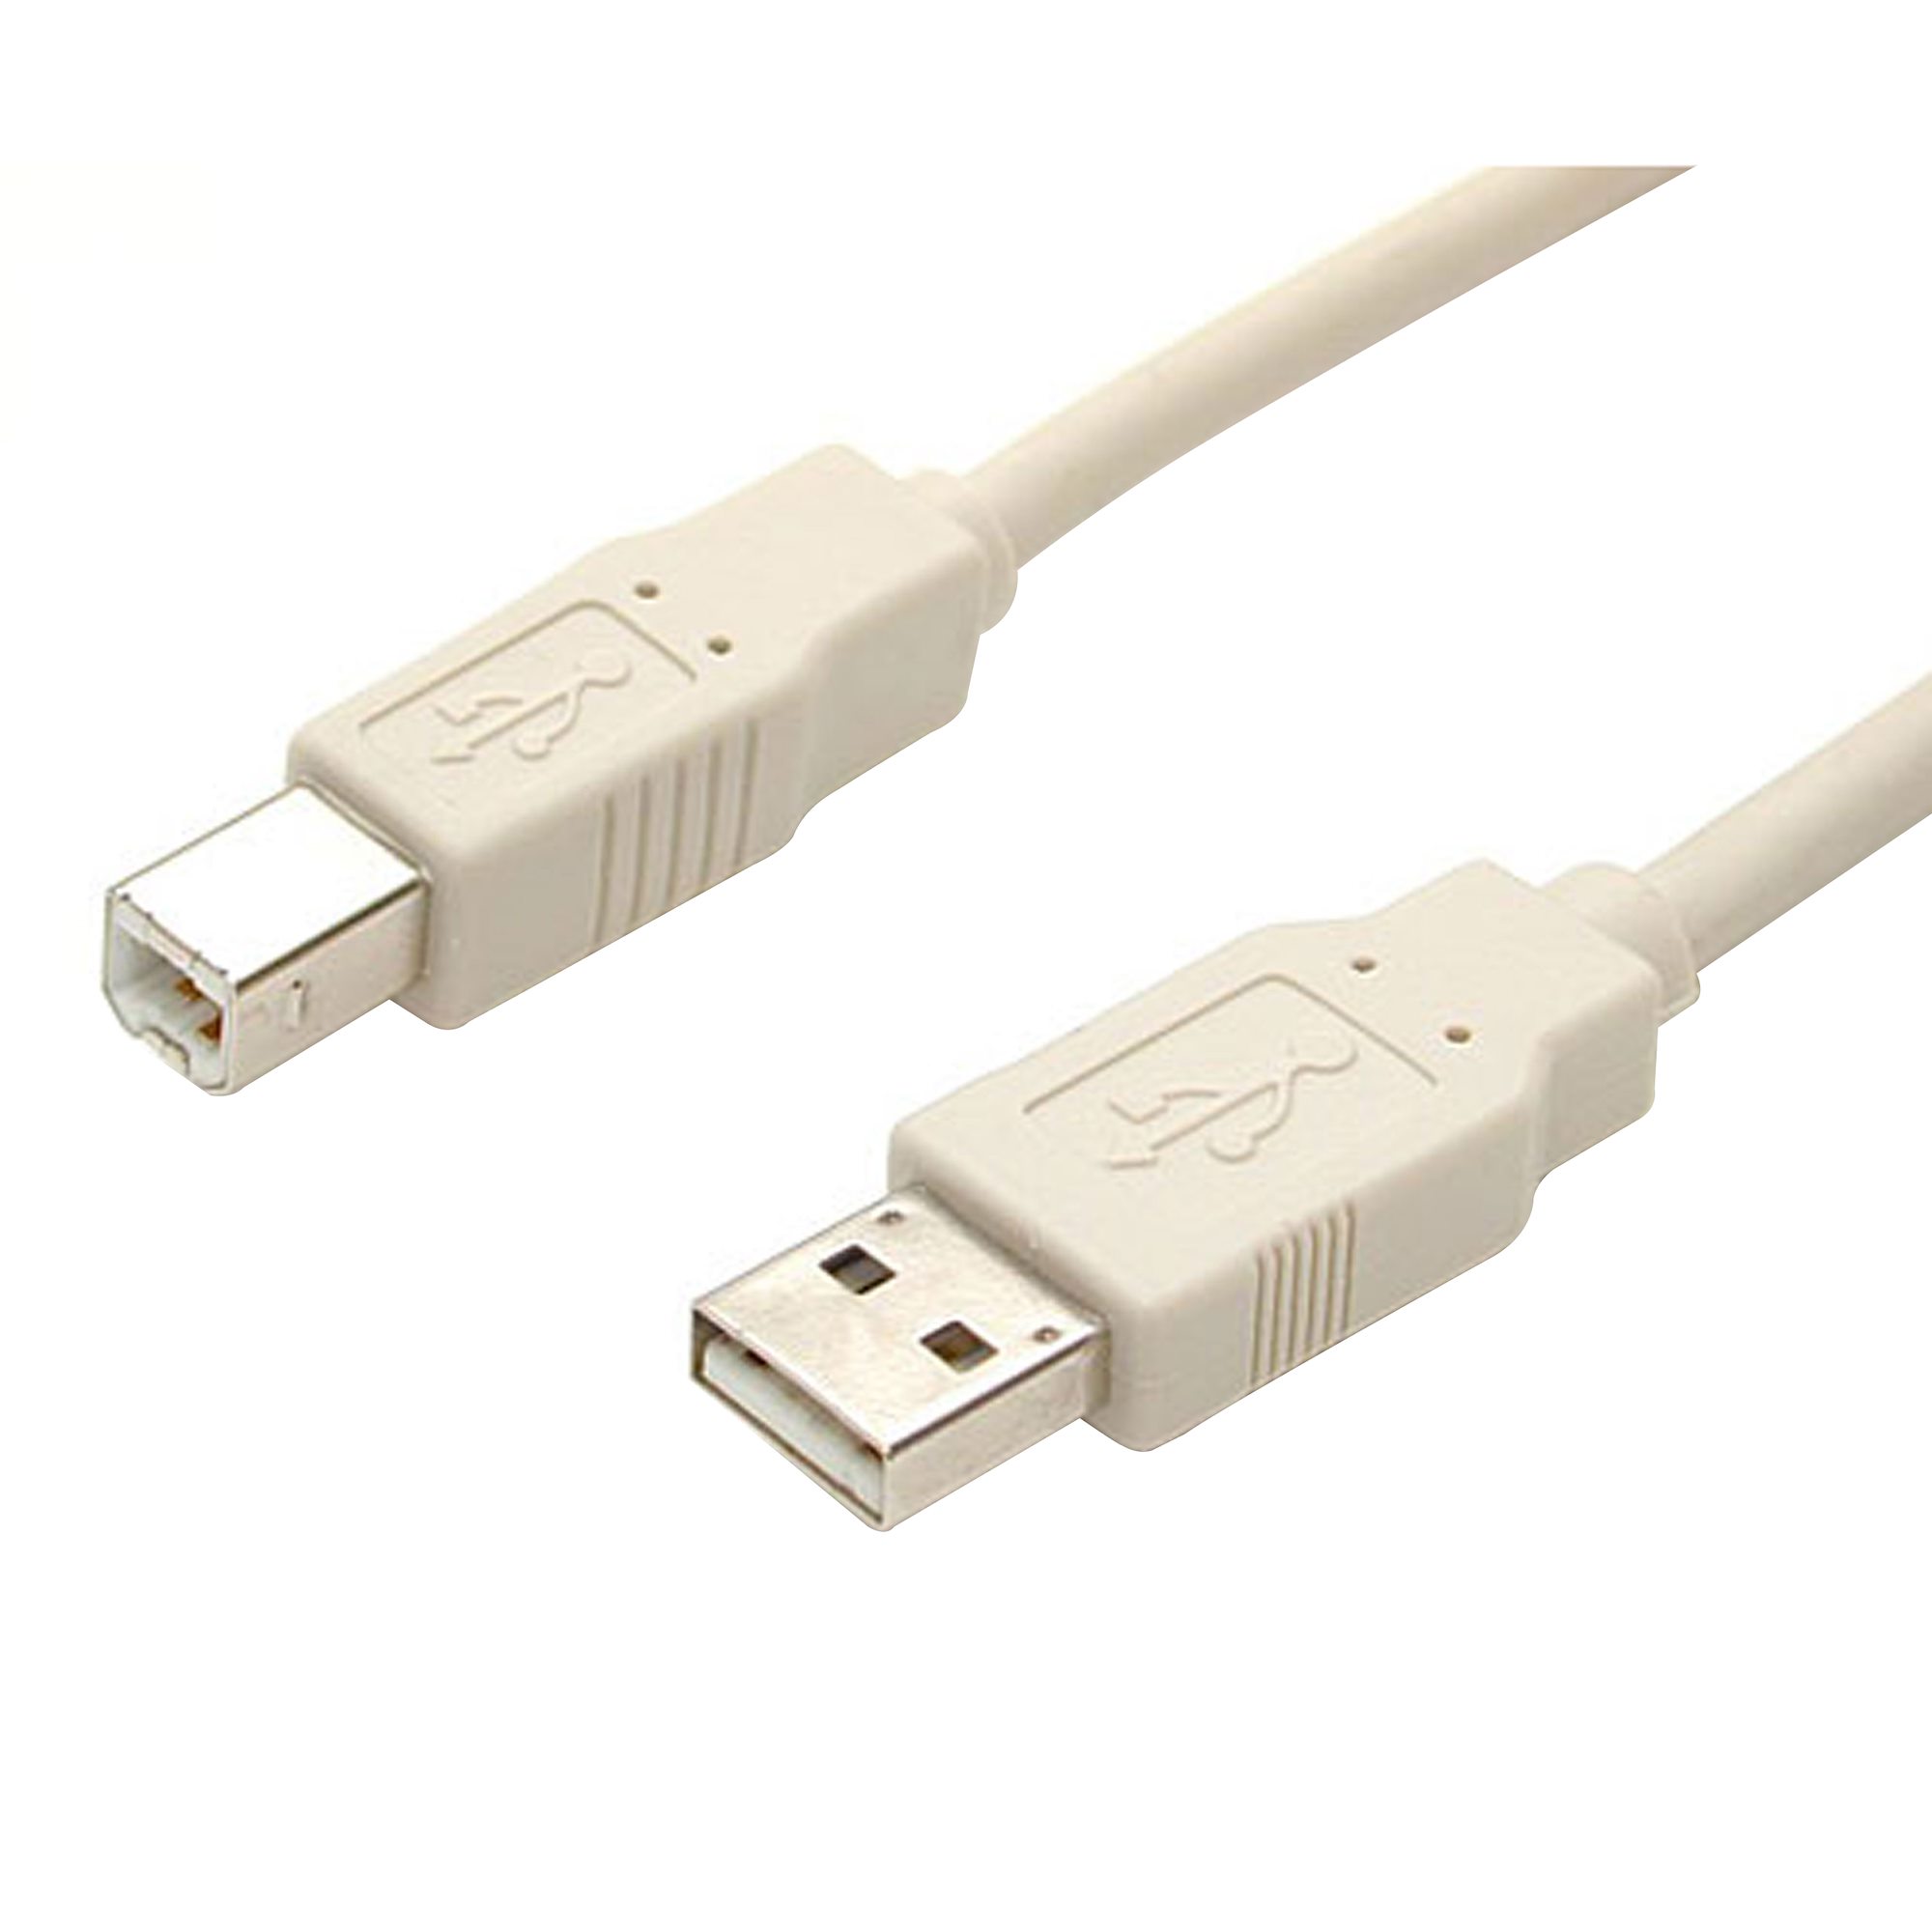 USB EXTENSION Beige CABLE 6' A MALE to A FEMALE 6FT 6 FT New 